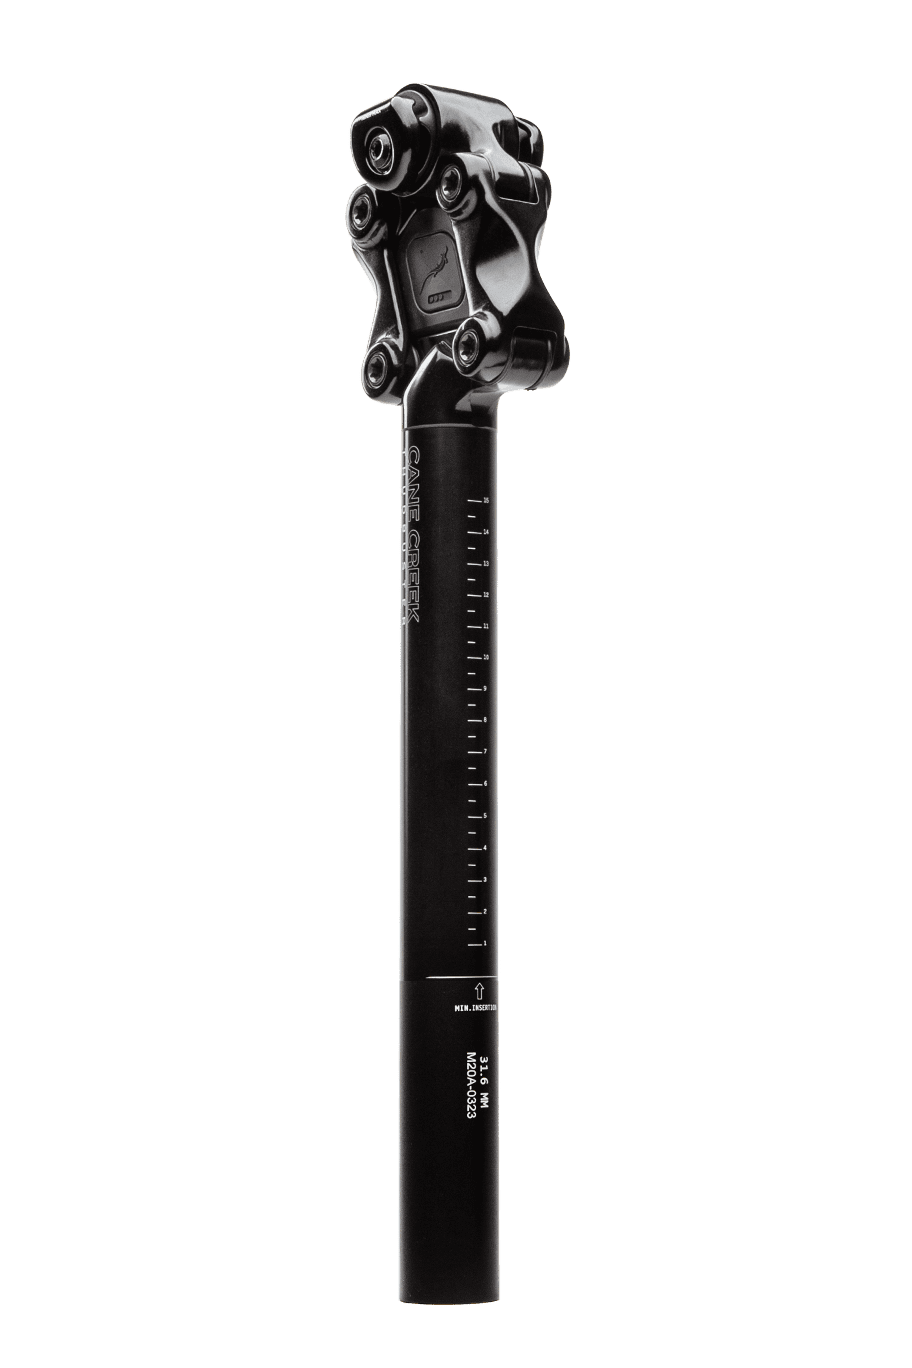 Suspension Seatpost Thudbuster ST - Cane Creek Cycling Components